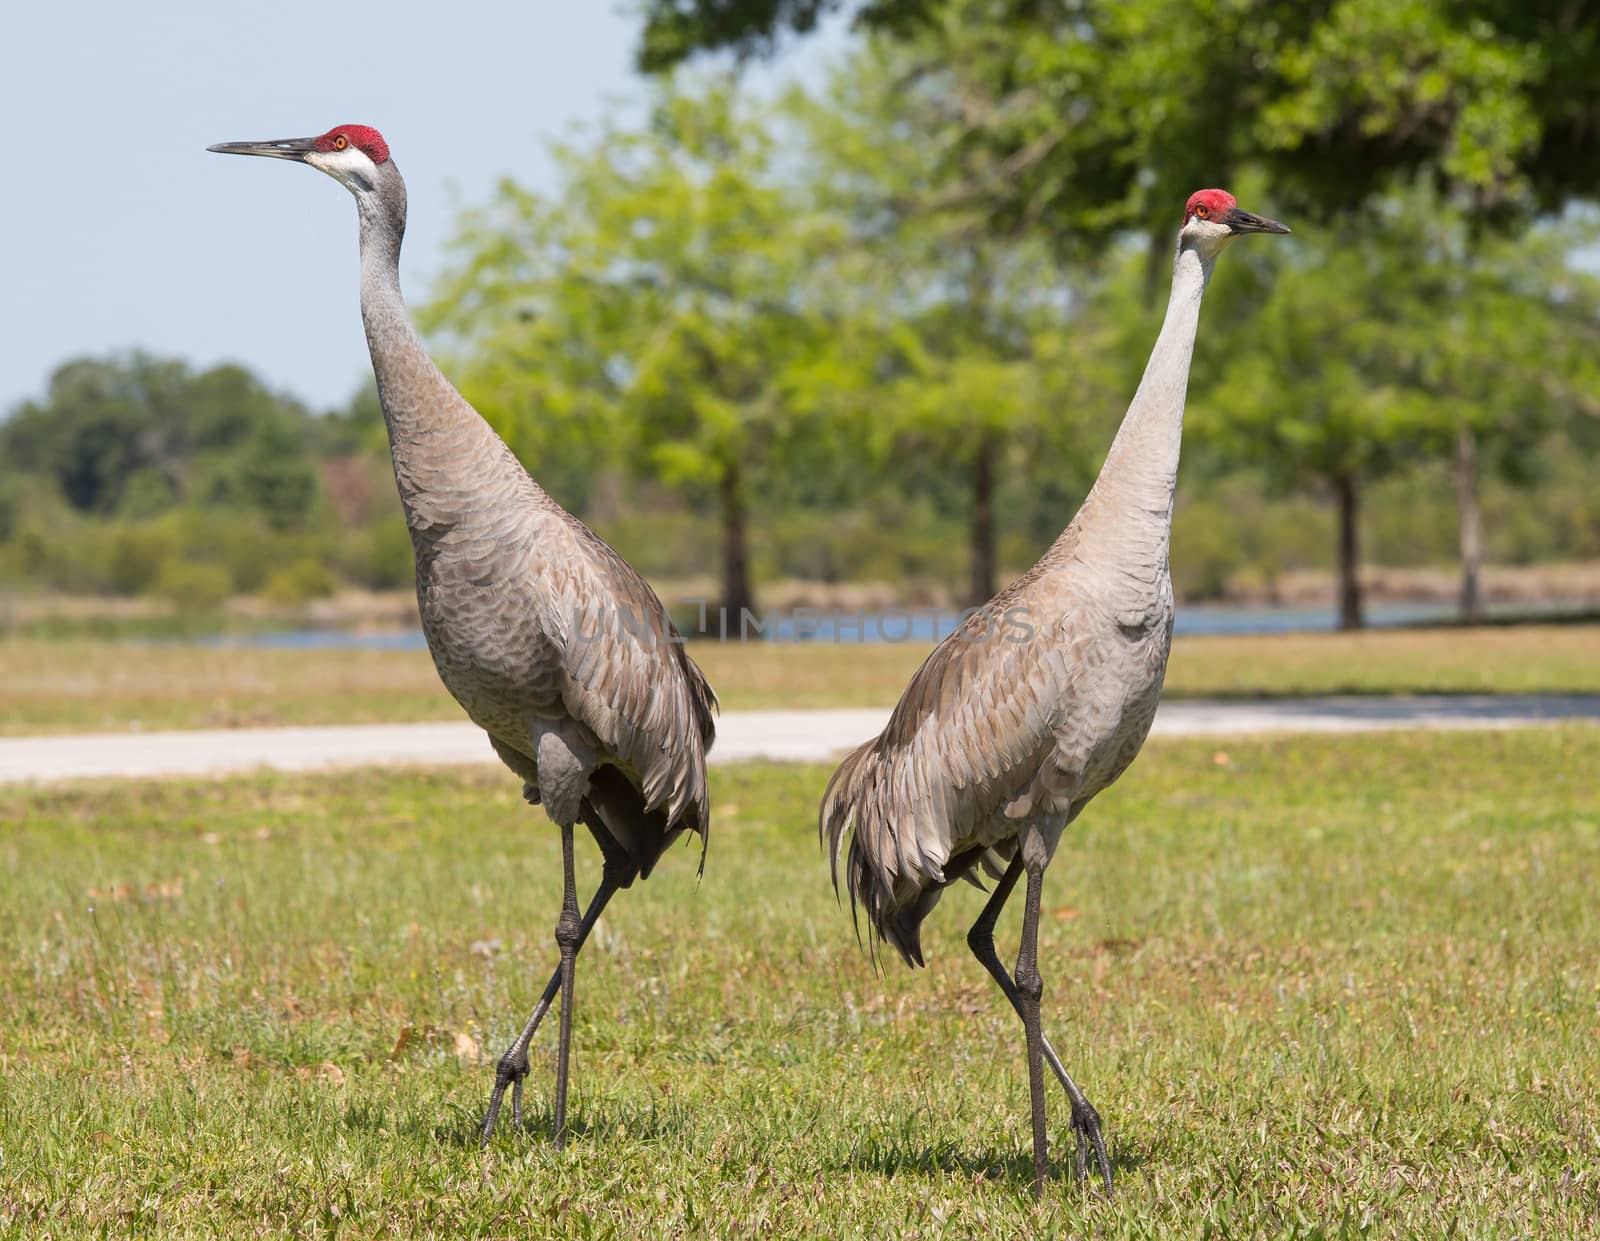 Sandhill Cranes in Pose by picturyay